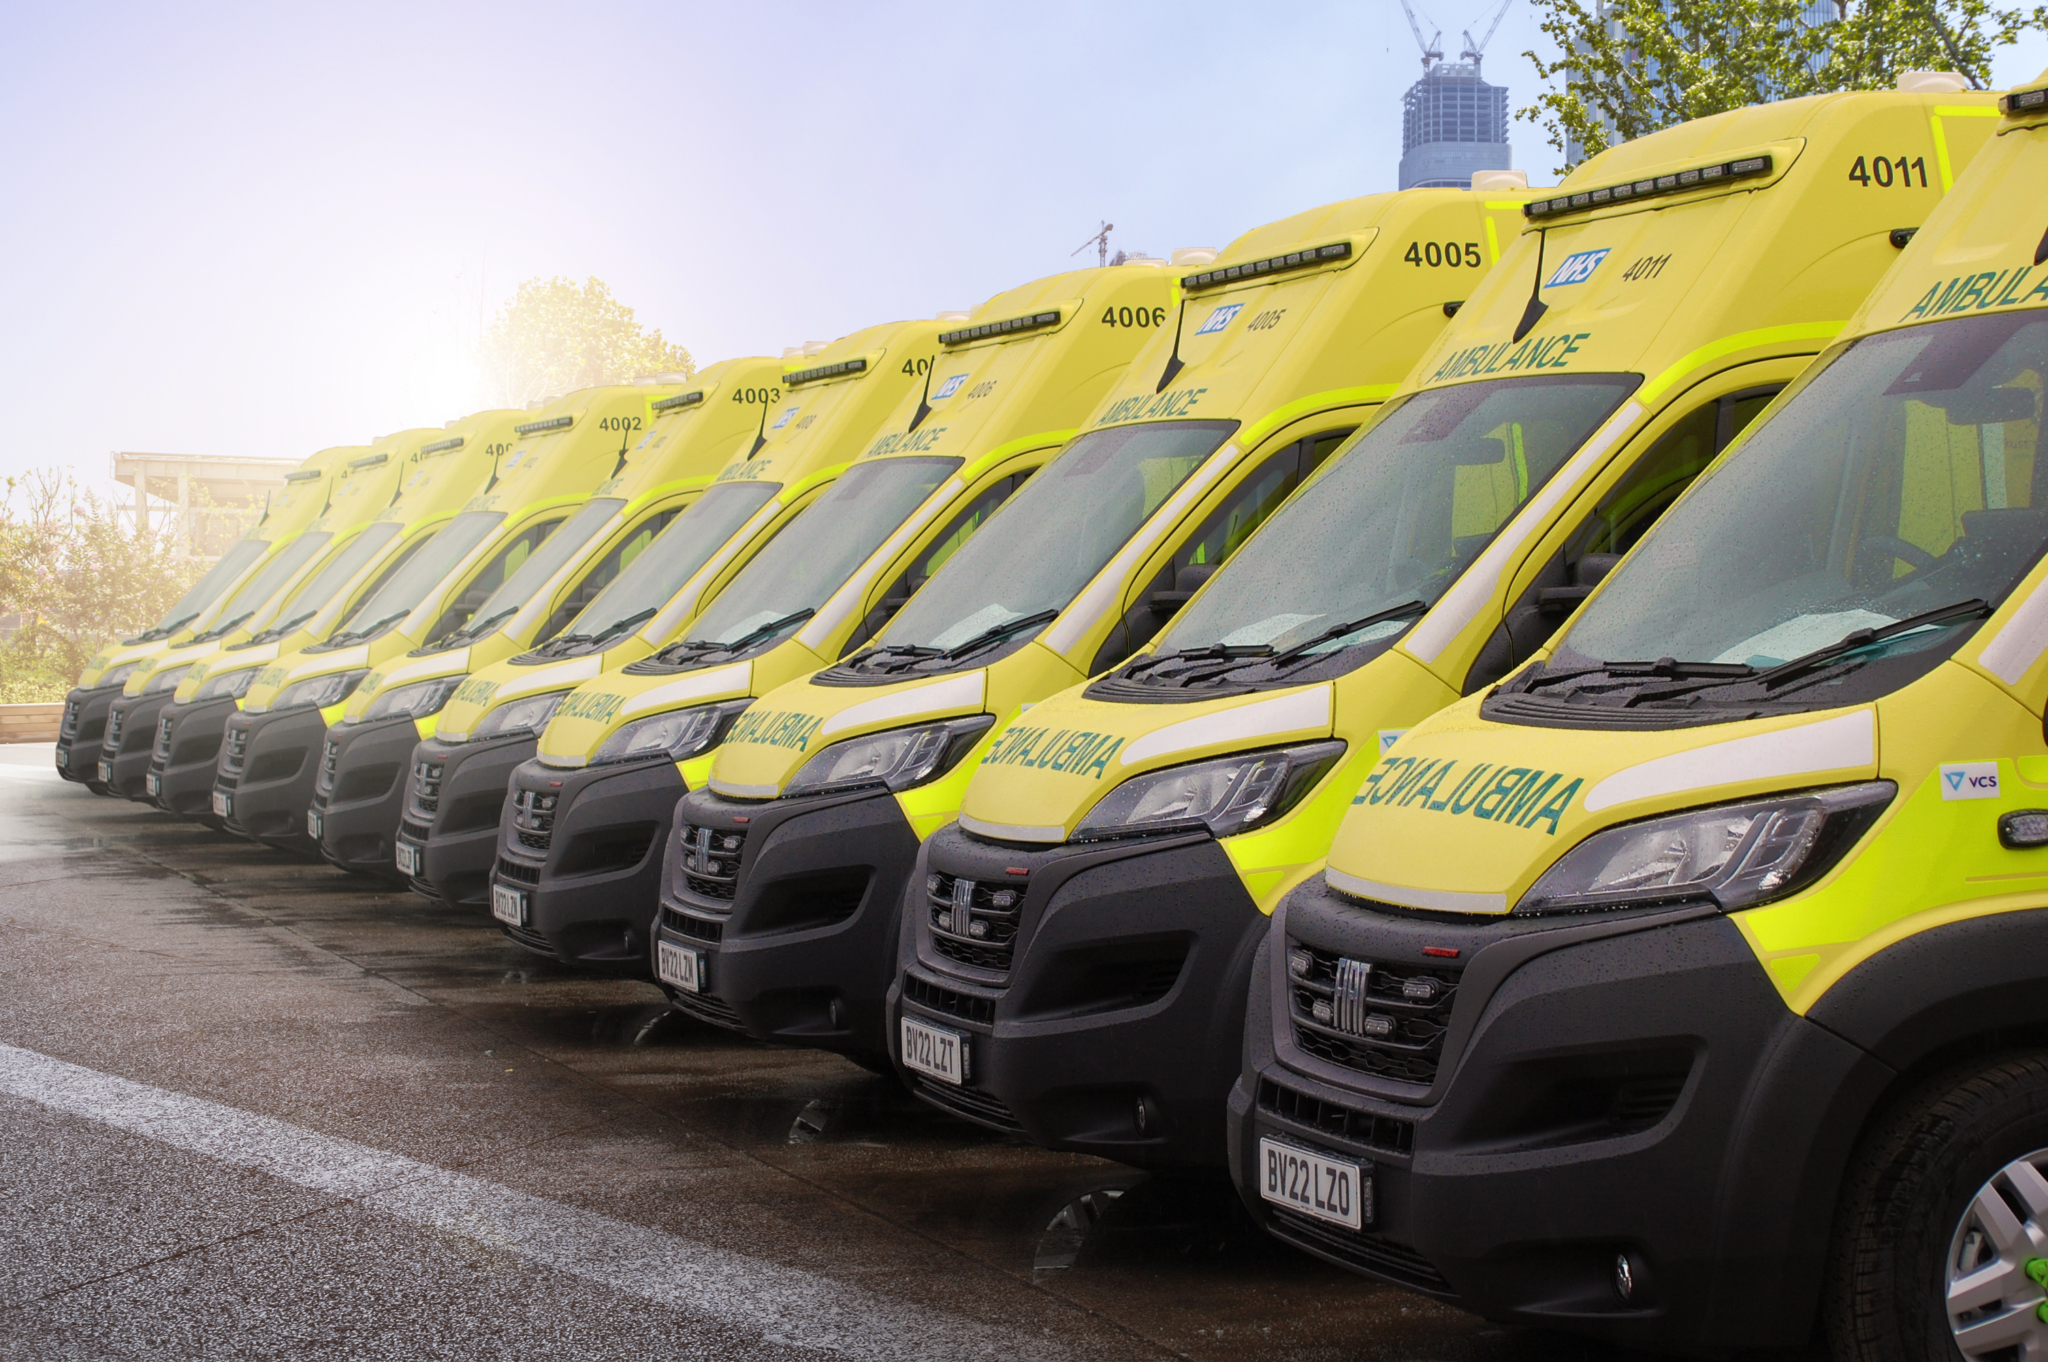 VCS invests £5 million in UK’s largest ambulance and police vehicle factory